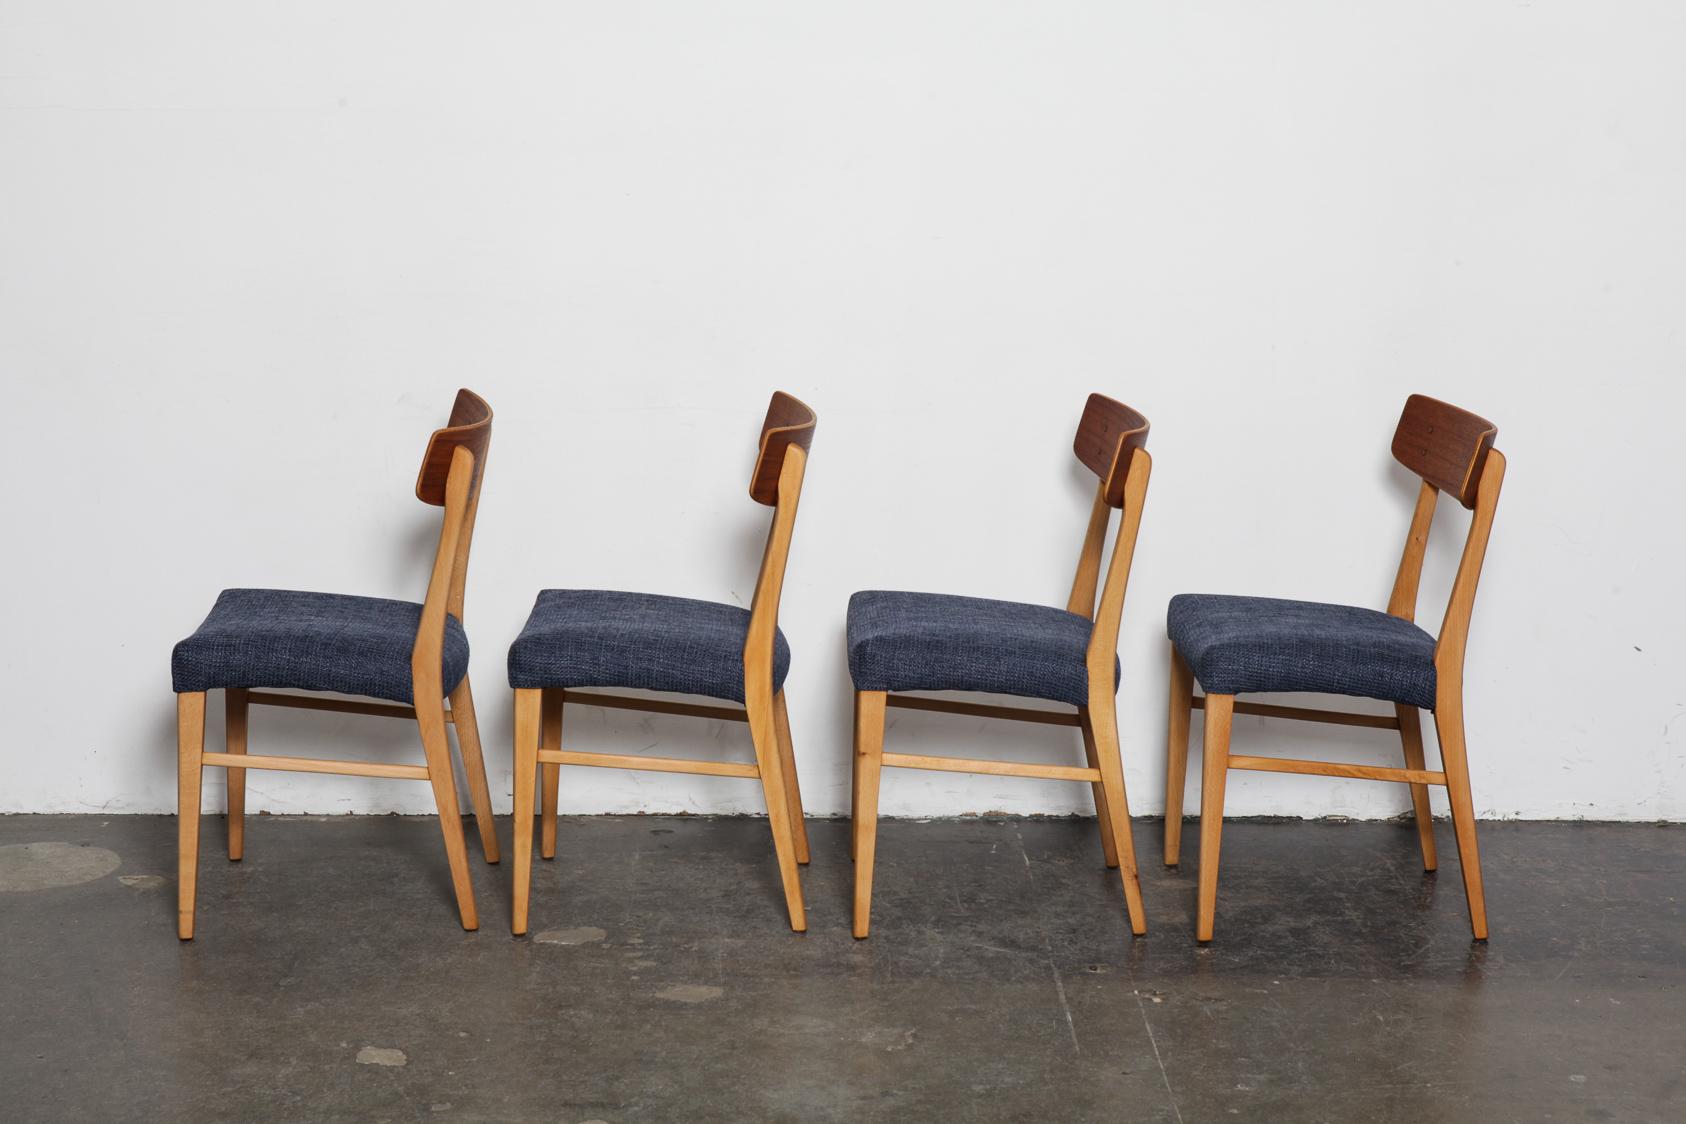 Oiled Set of 4 Teak and Beech 1950s Danish Modern Dining Chairs with Navy Seats